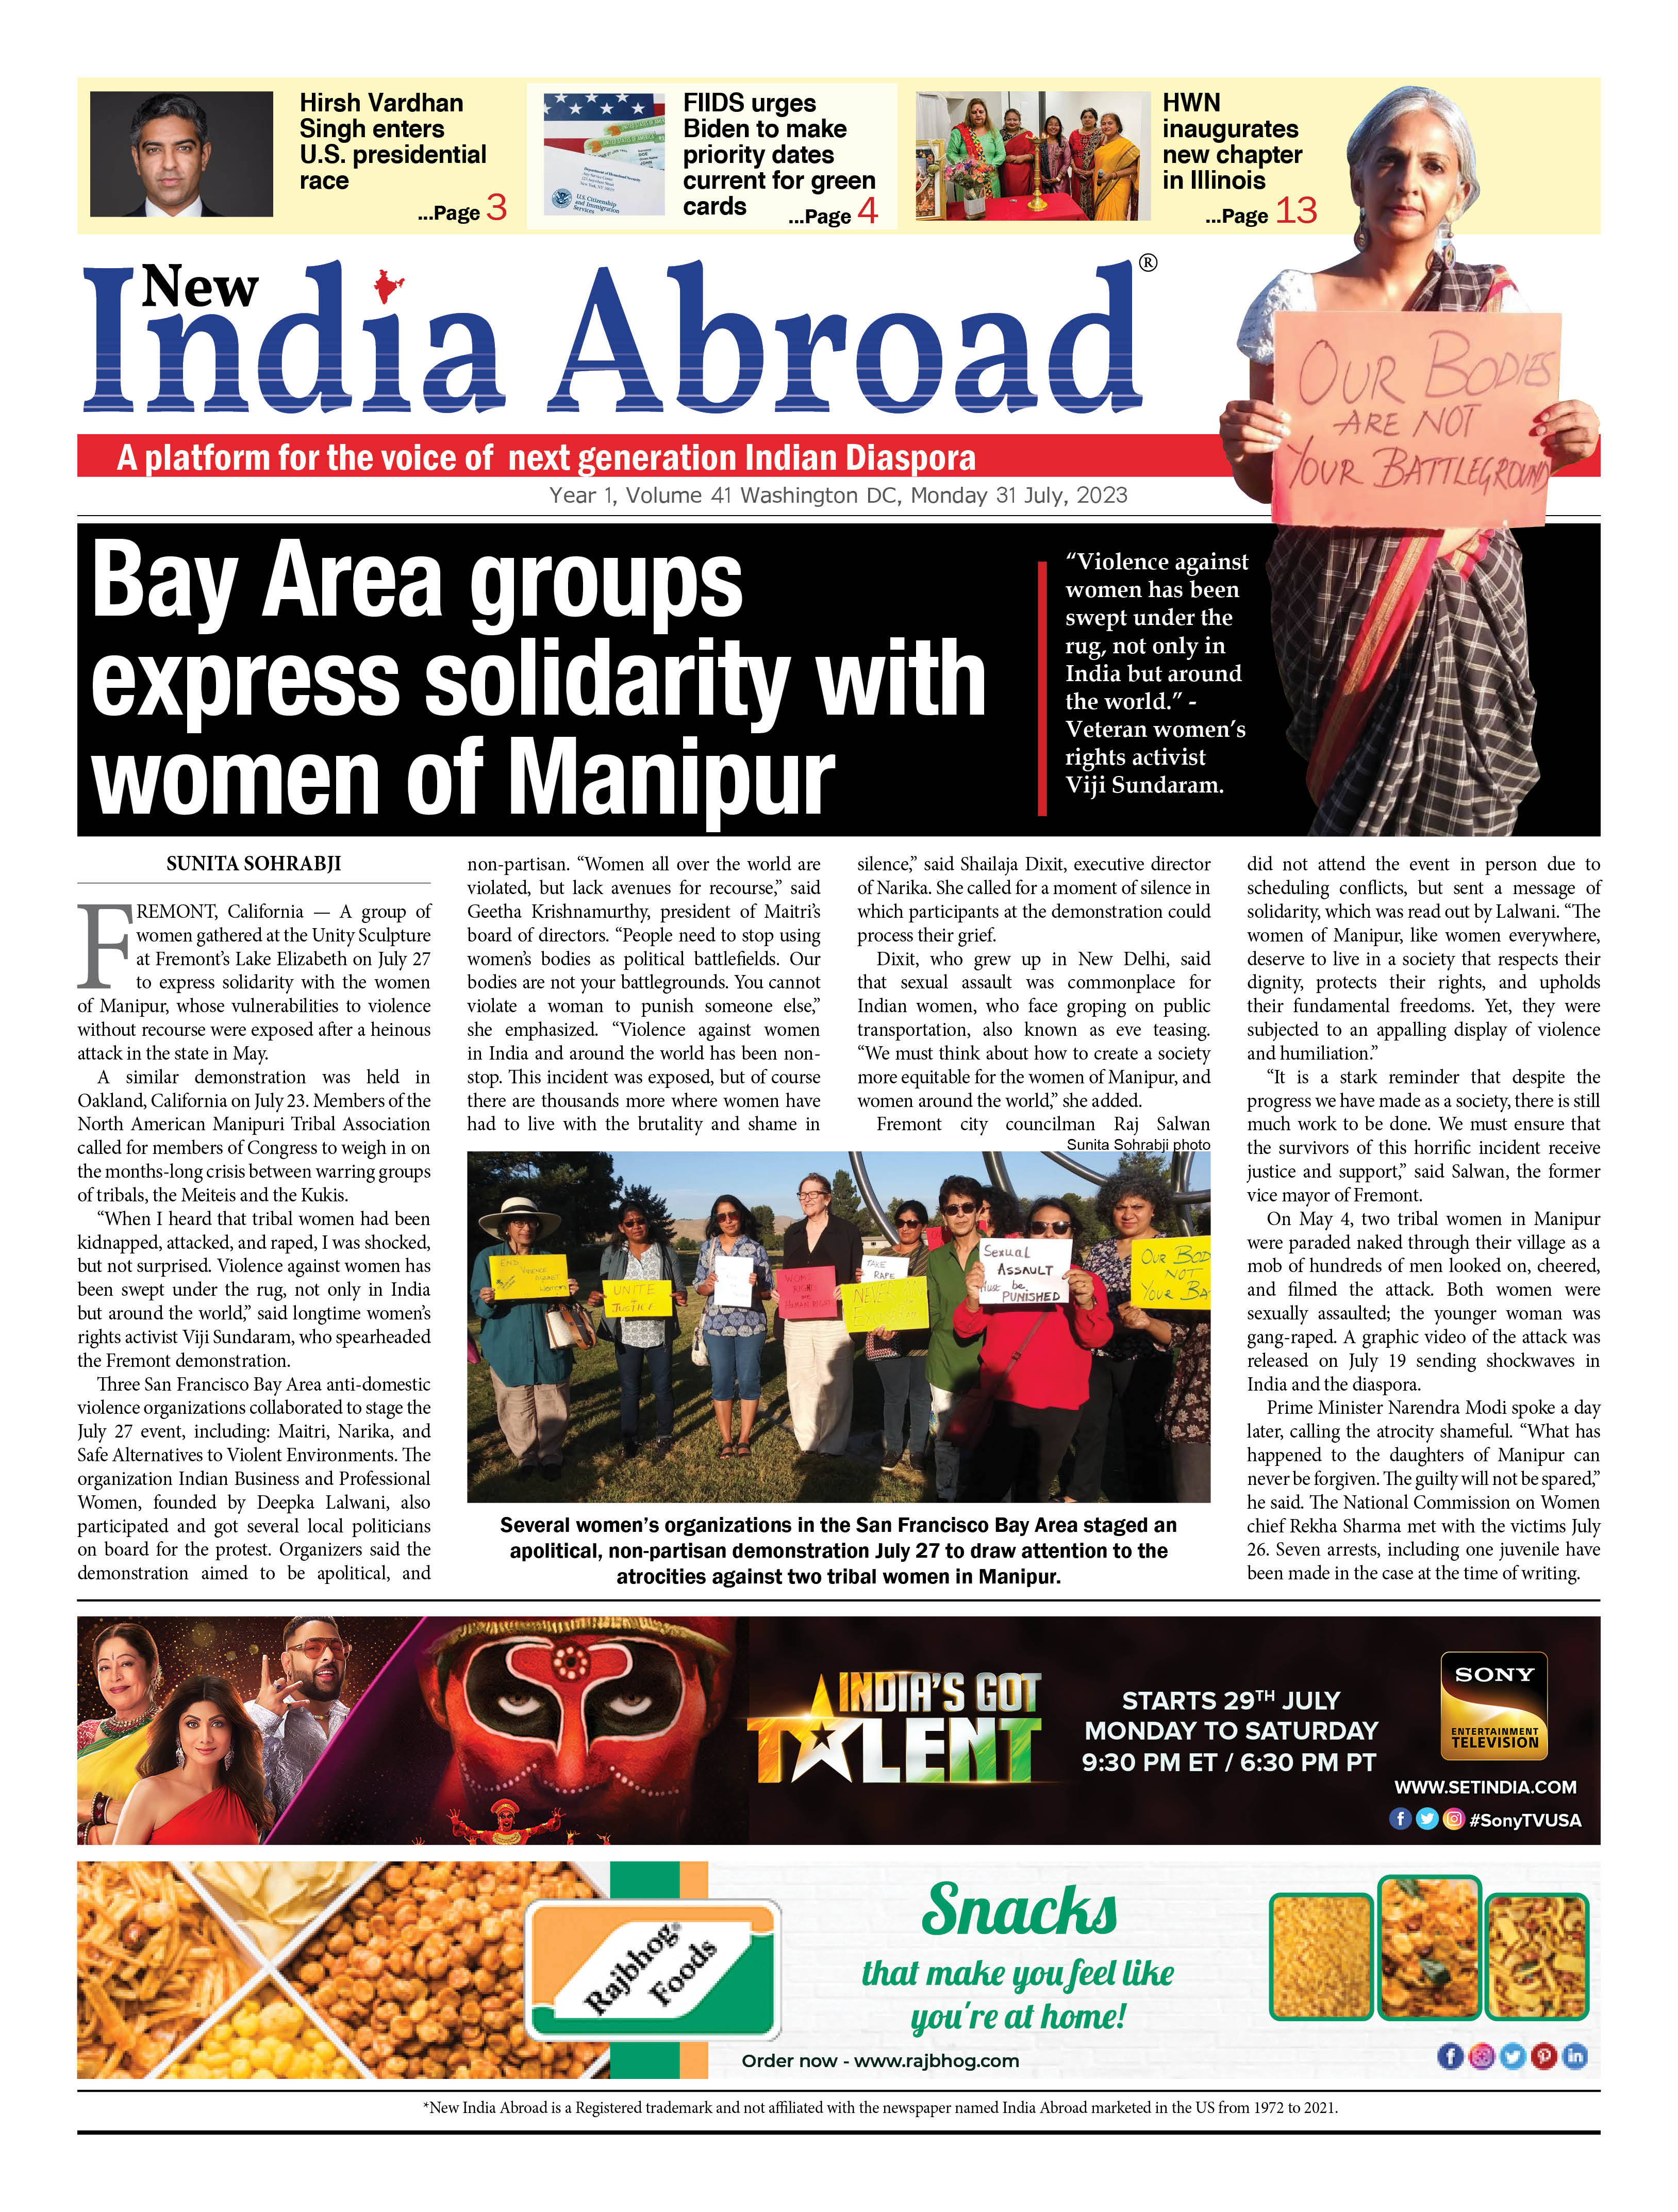 Bay Area Groups Express Solidarity with Manipur Women